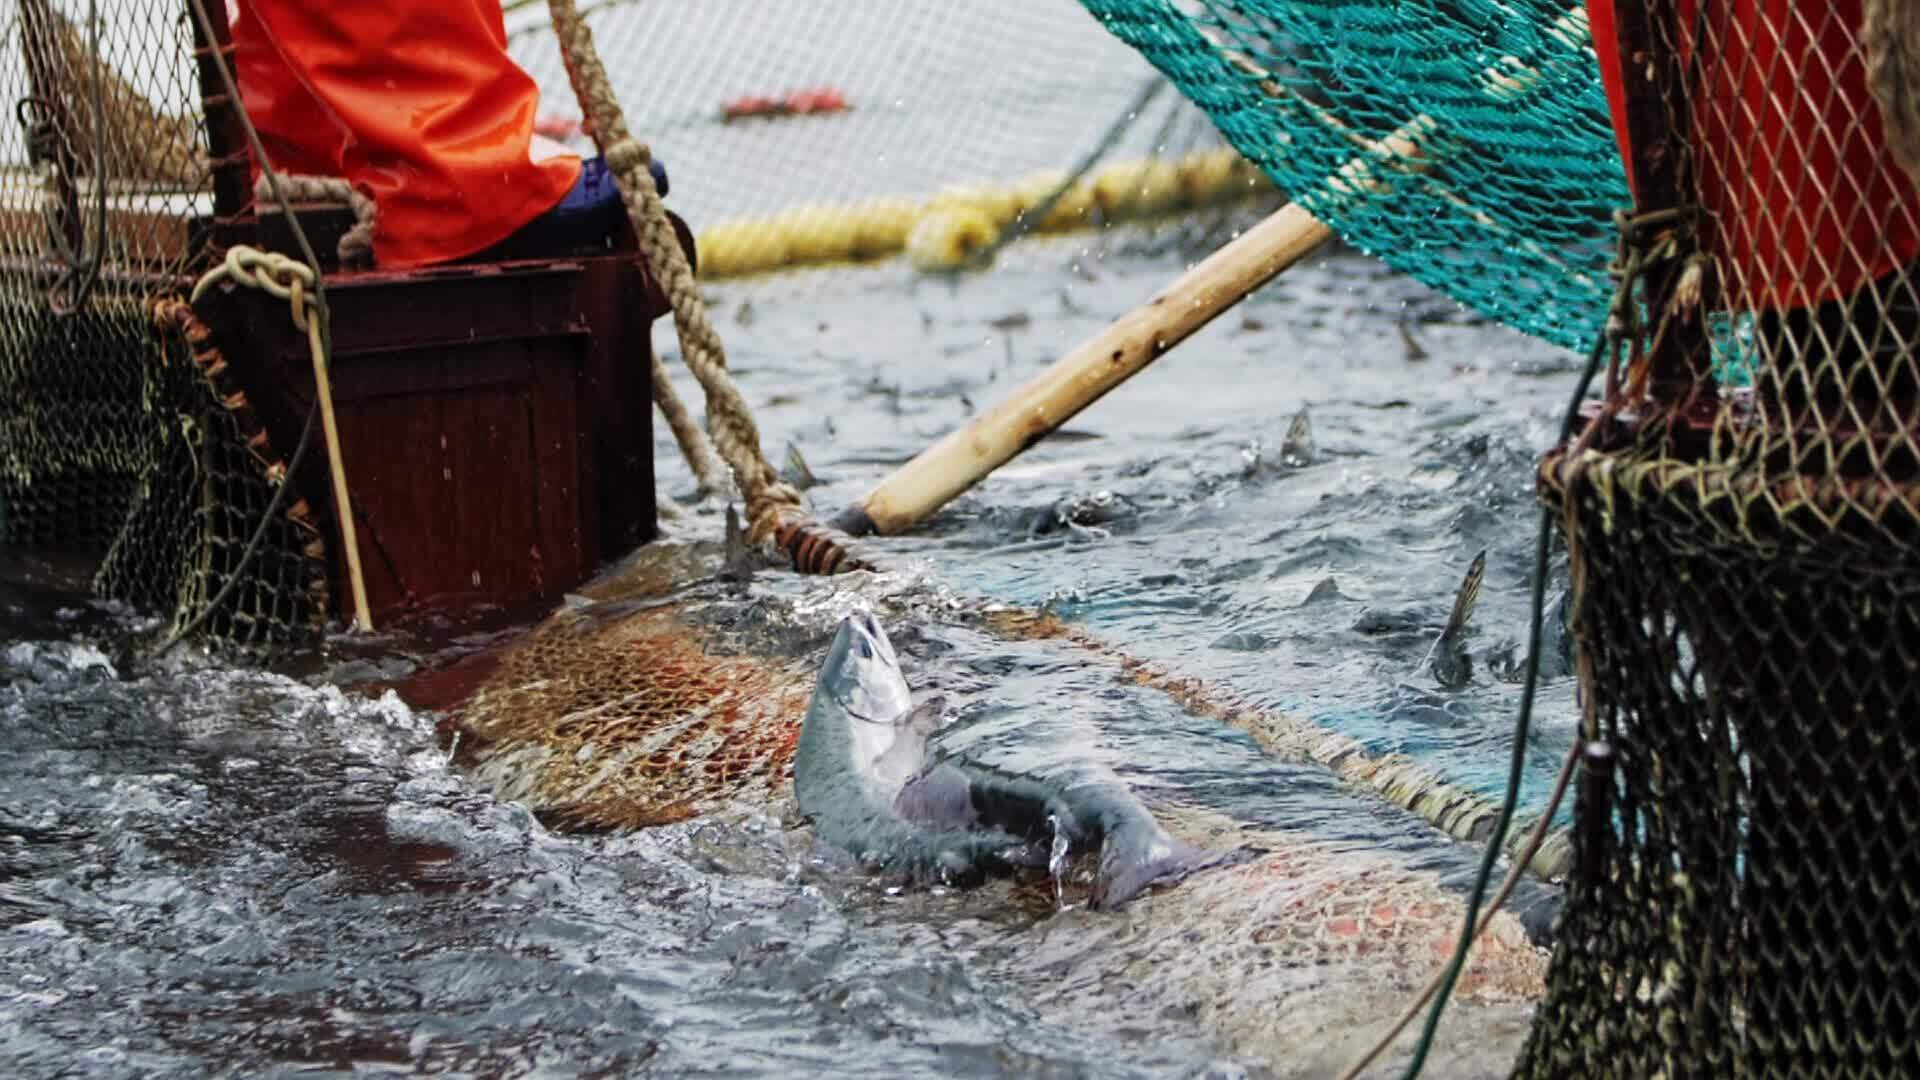 https://static.vecteezy.com/system/resources/thumbnails/038/354/373/original/fishing-in-close-up-slow-motion-nets-capturing-red-fish-fishing-gateway-to-marine-delicacies-fishing-sourcing-red-fish-for-gourmet-dishes-essential-for-bringing-ocean-s-bounty-to-table-video.jpg